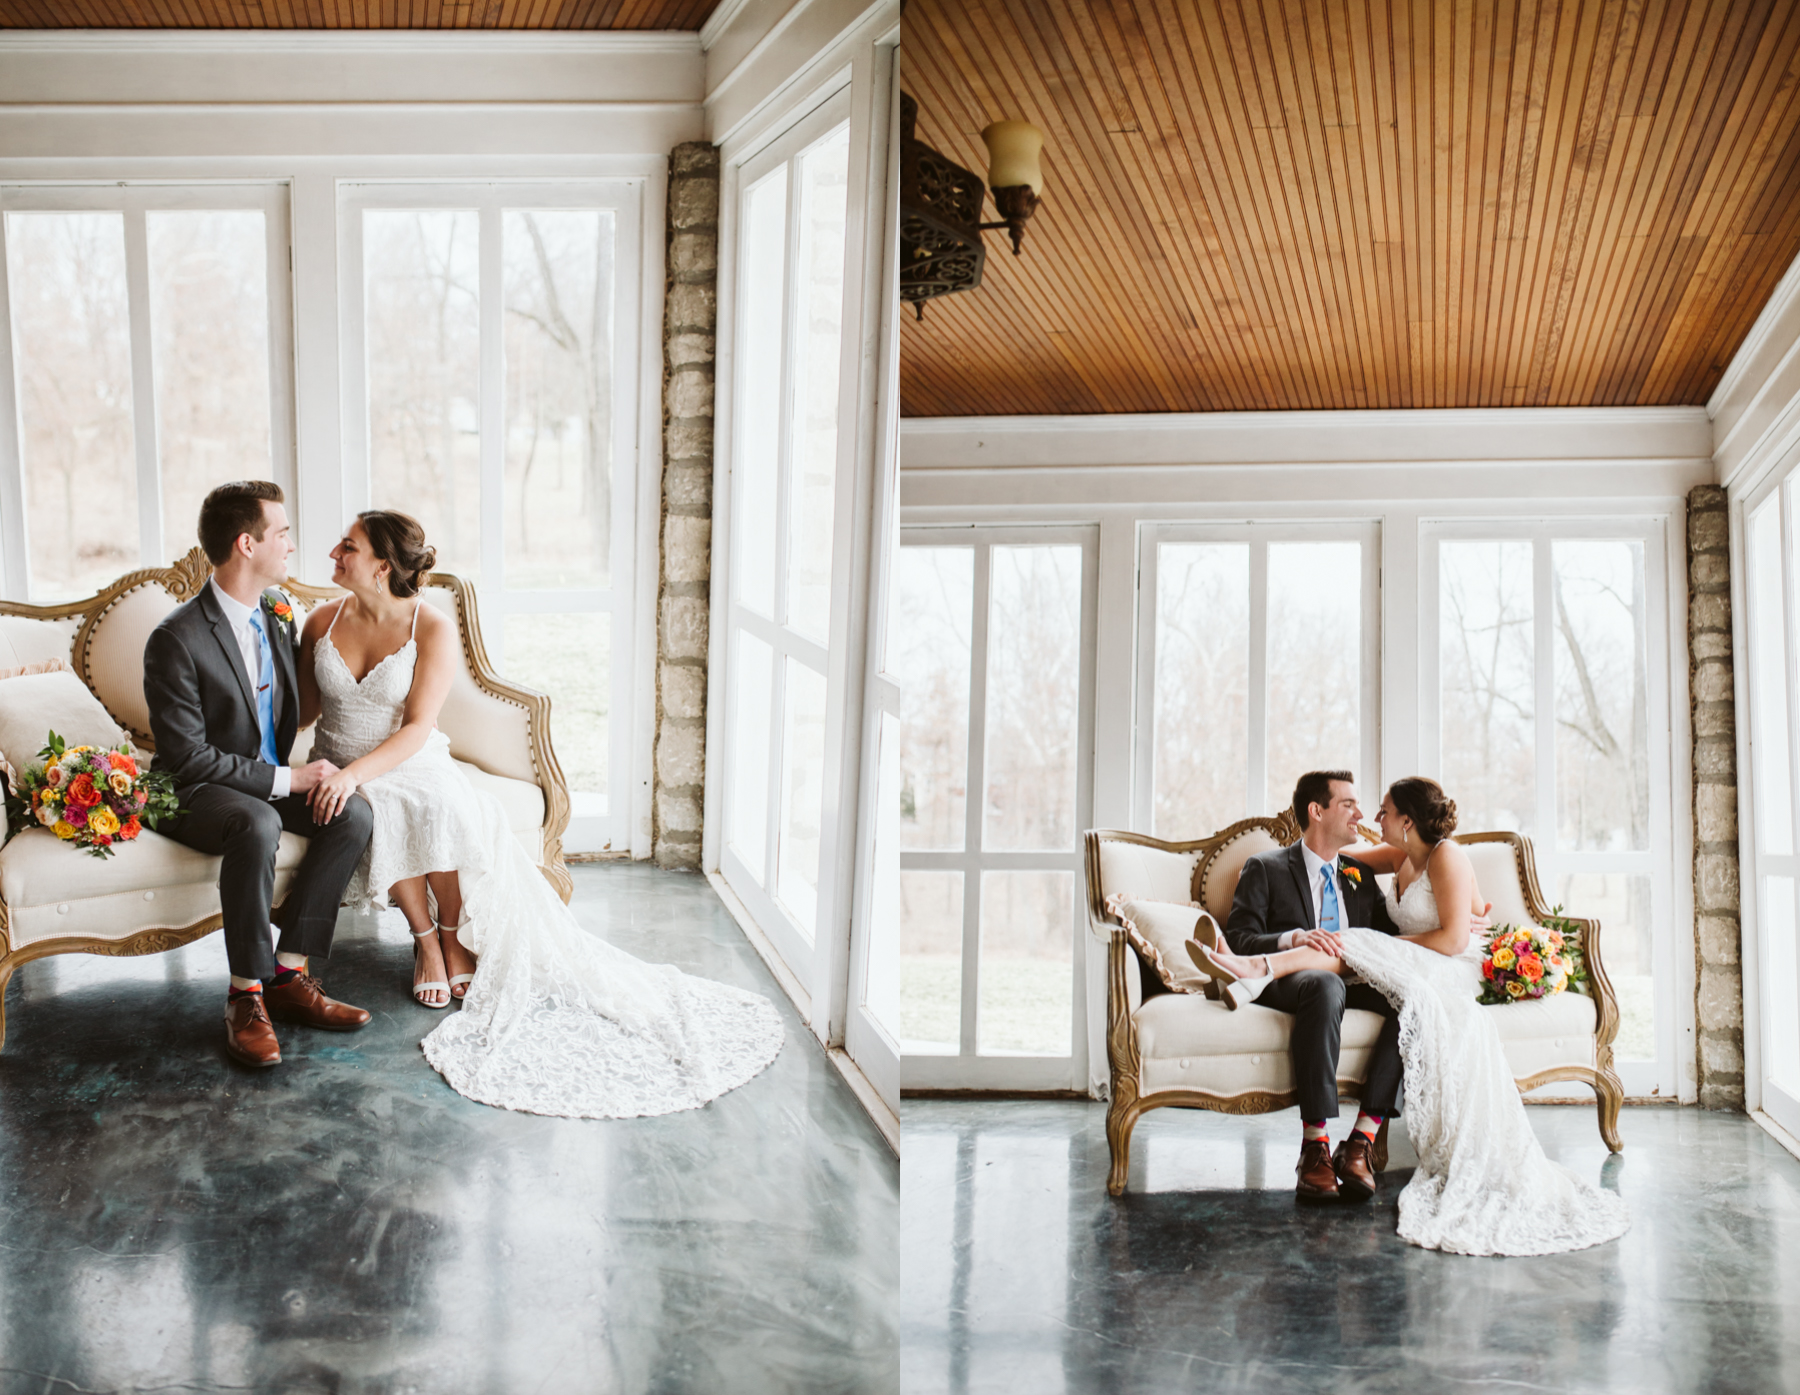 Bride and groom sit in a sunroom at the stone house of st charles wedding venue in missouri